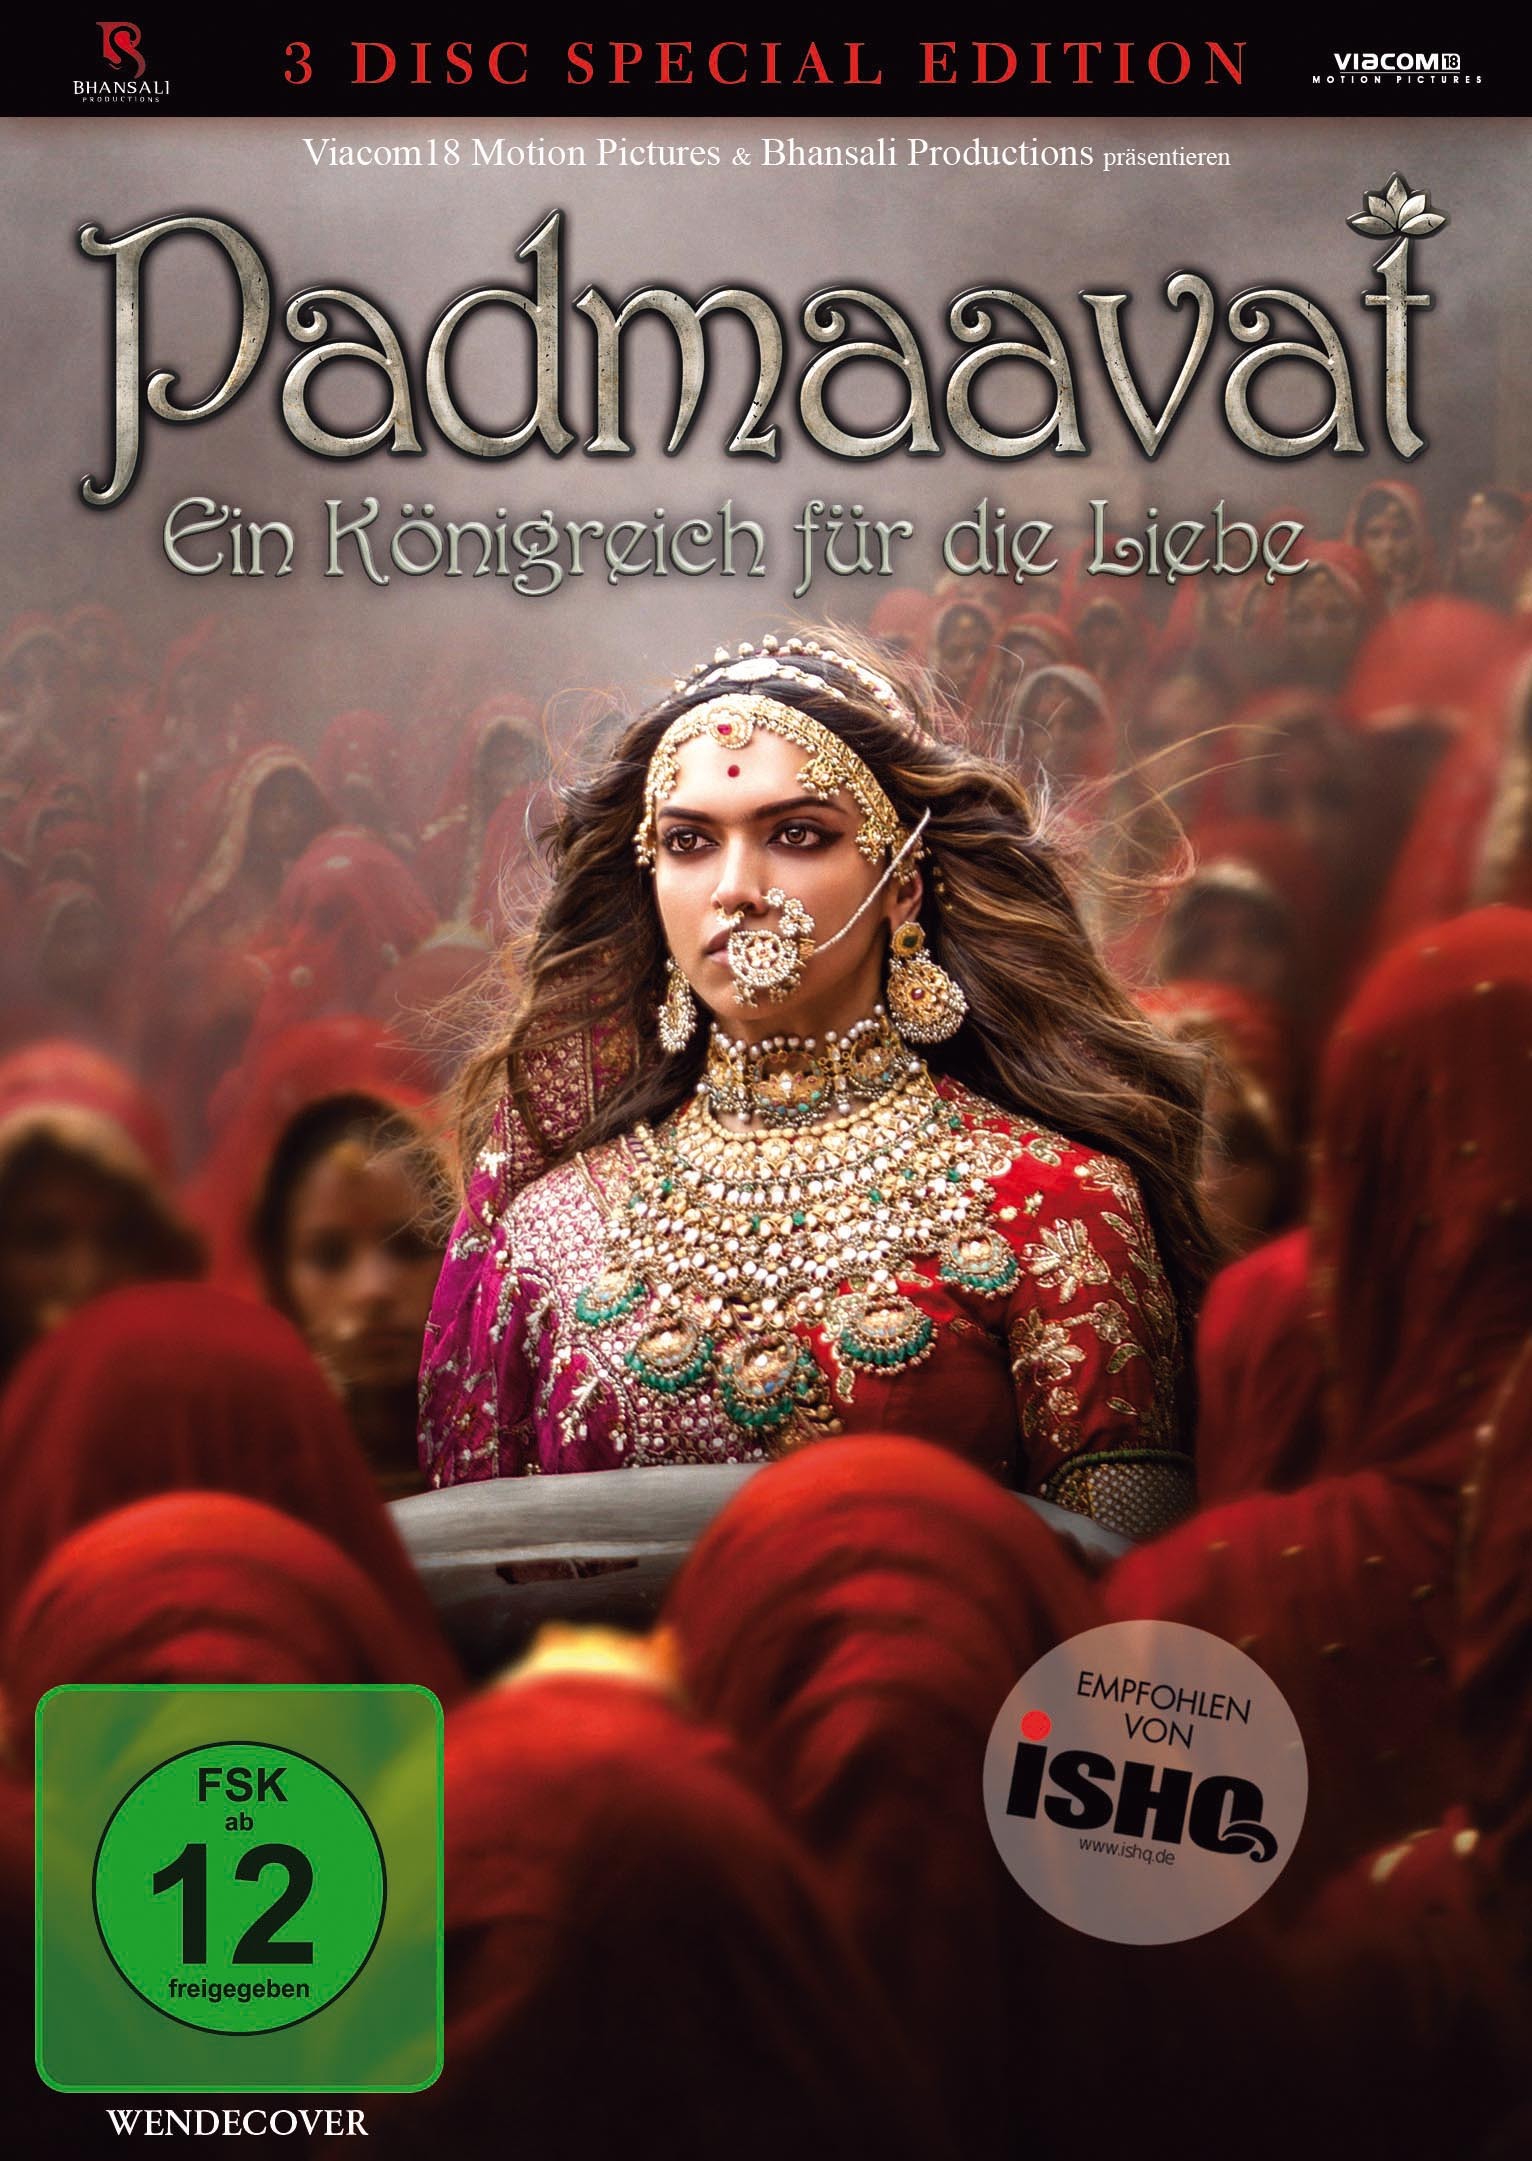 Image of Padmaavat - 3 Disc Special Edition